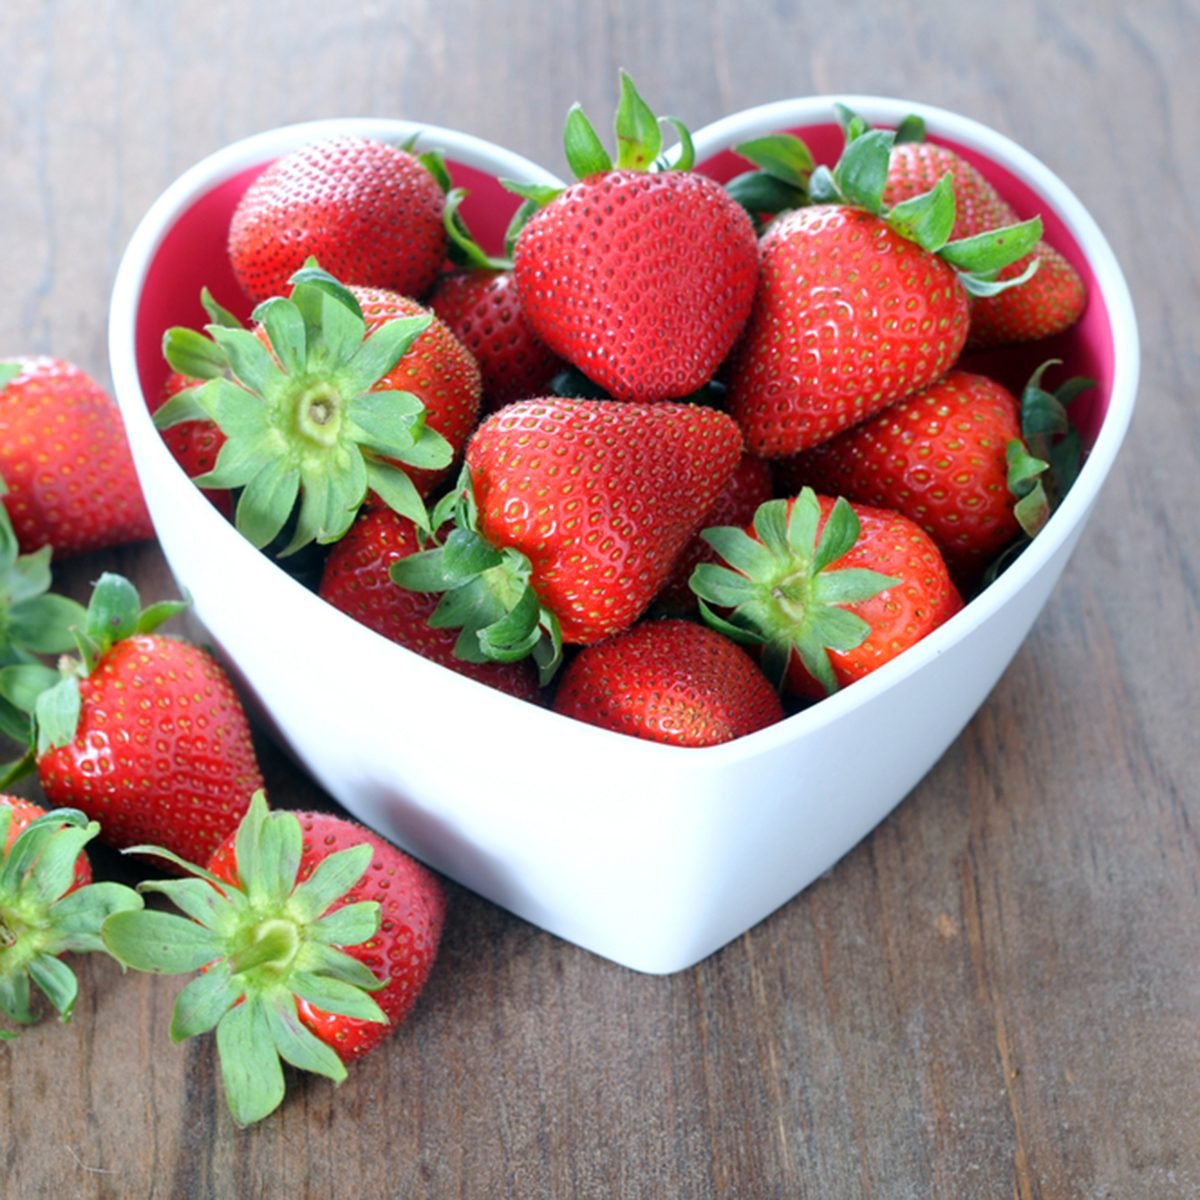 Top Reasons Strawberries Are Good for You